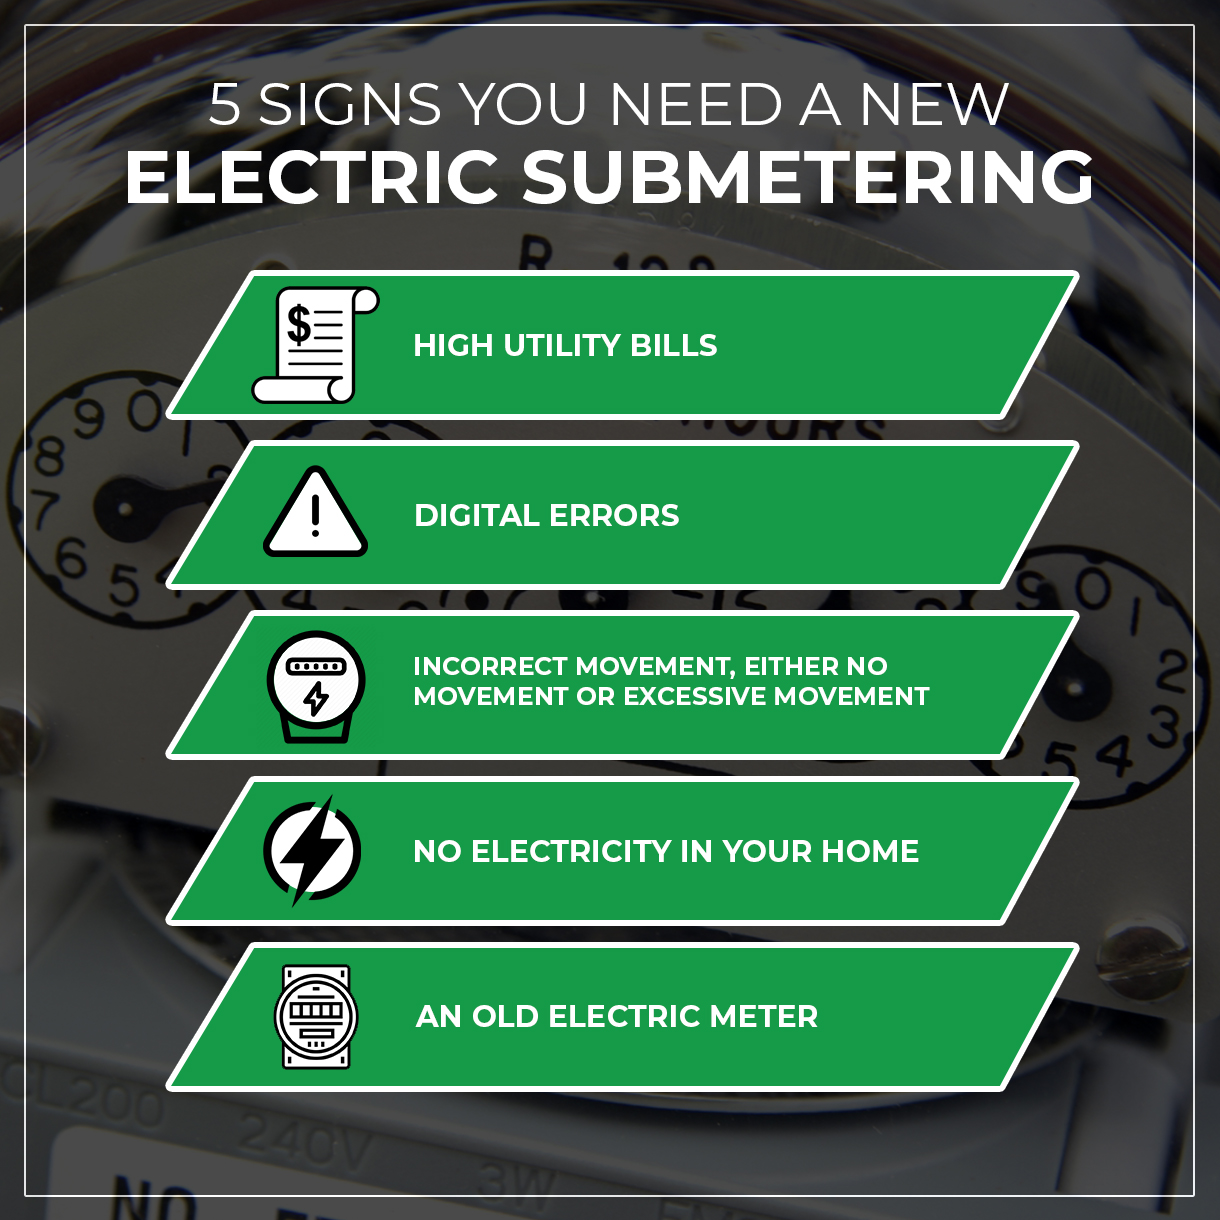 5 signs you need a new electric submetering